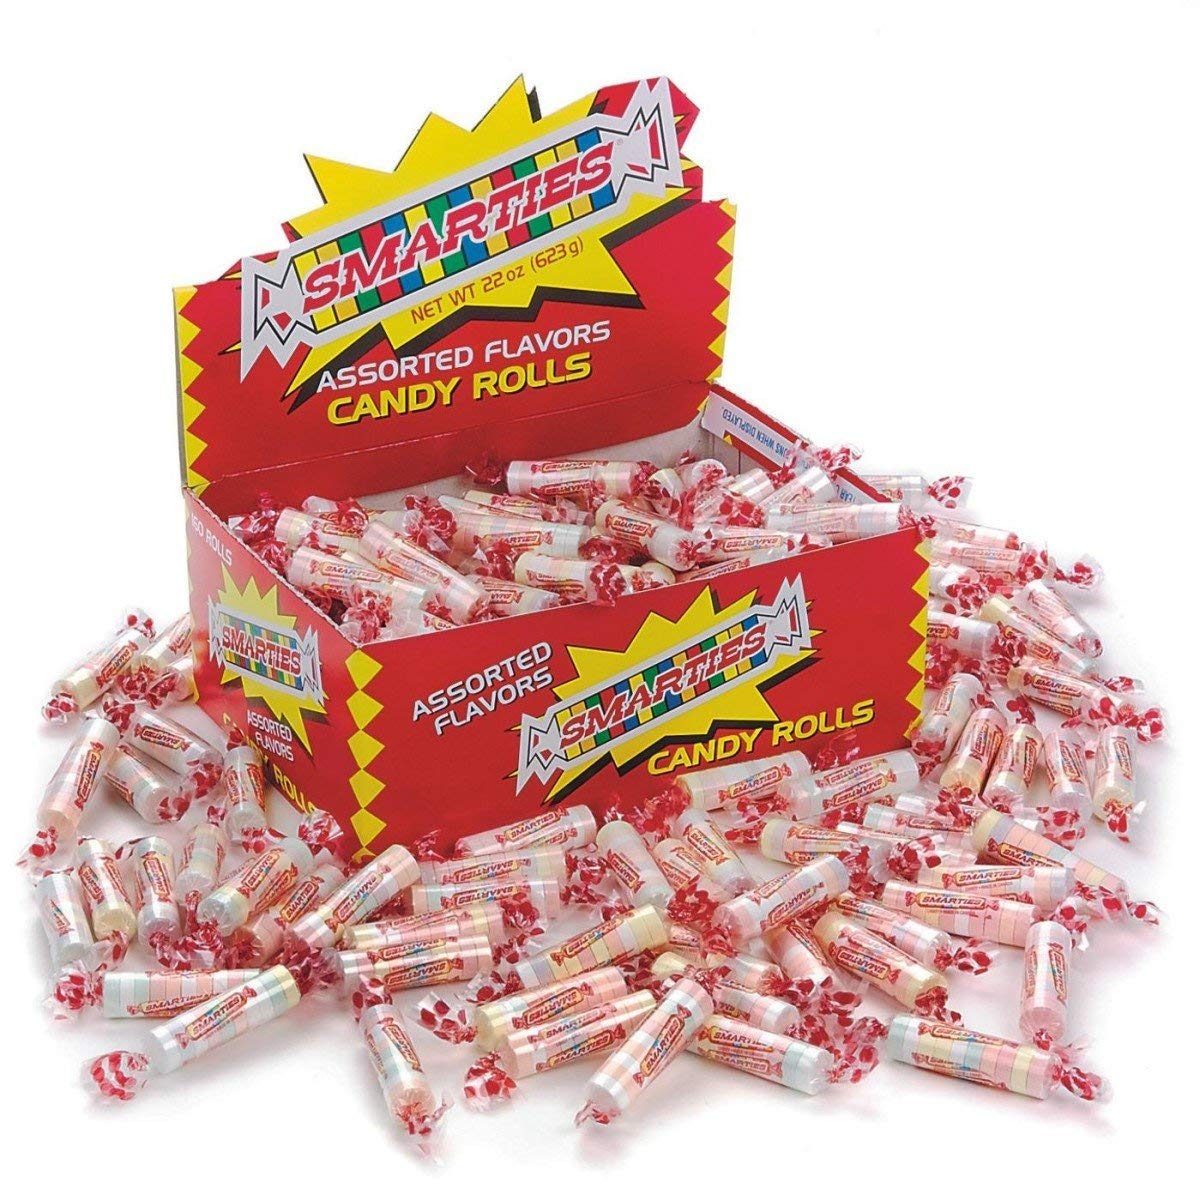 The best candy ever, I could eat shockers all the time. picture  courtesy:Google Images